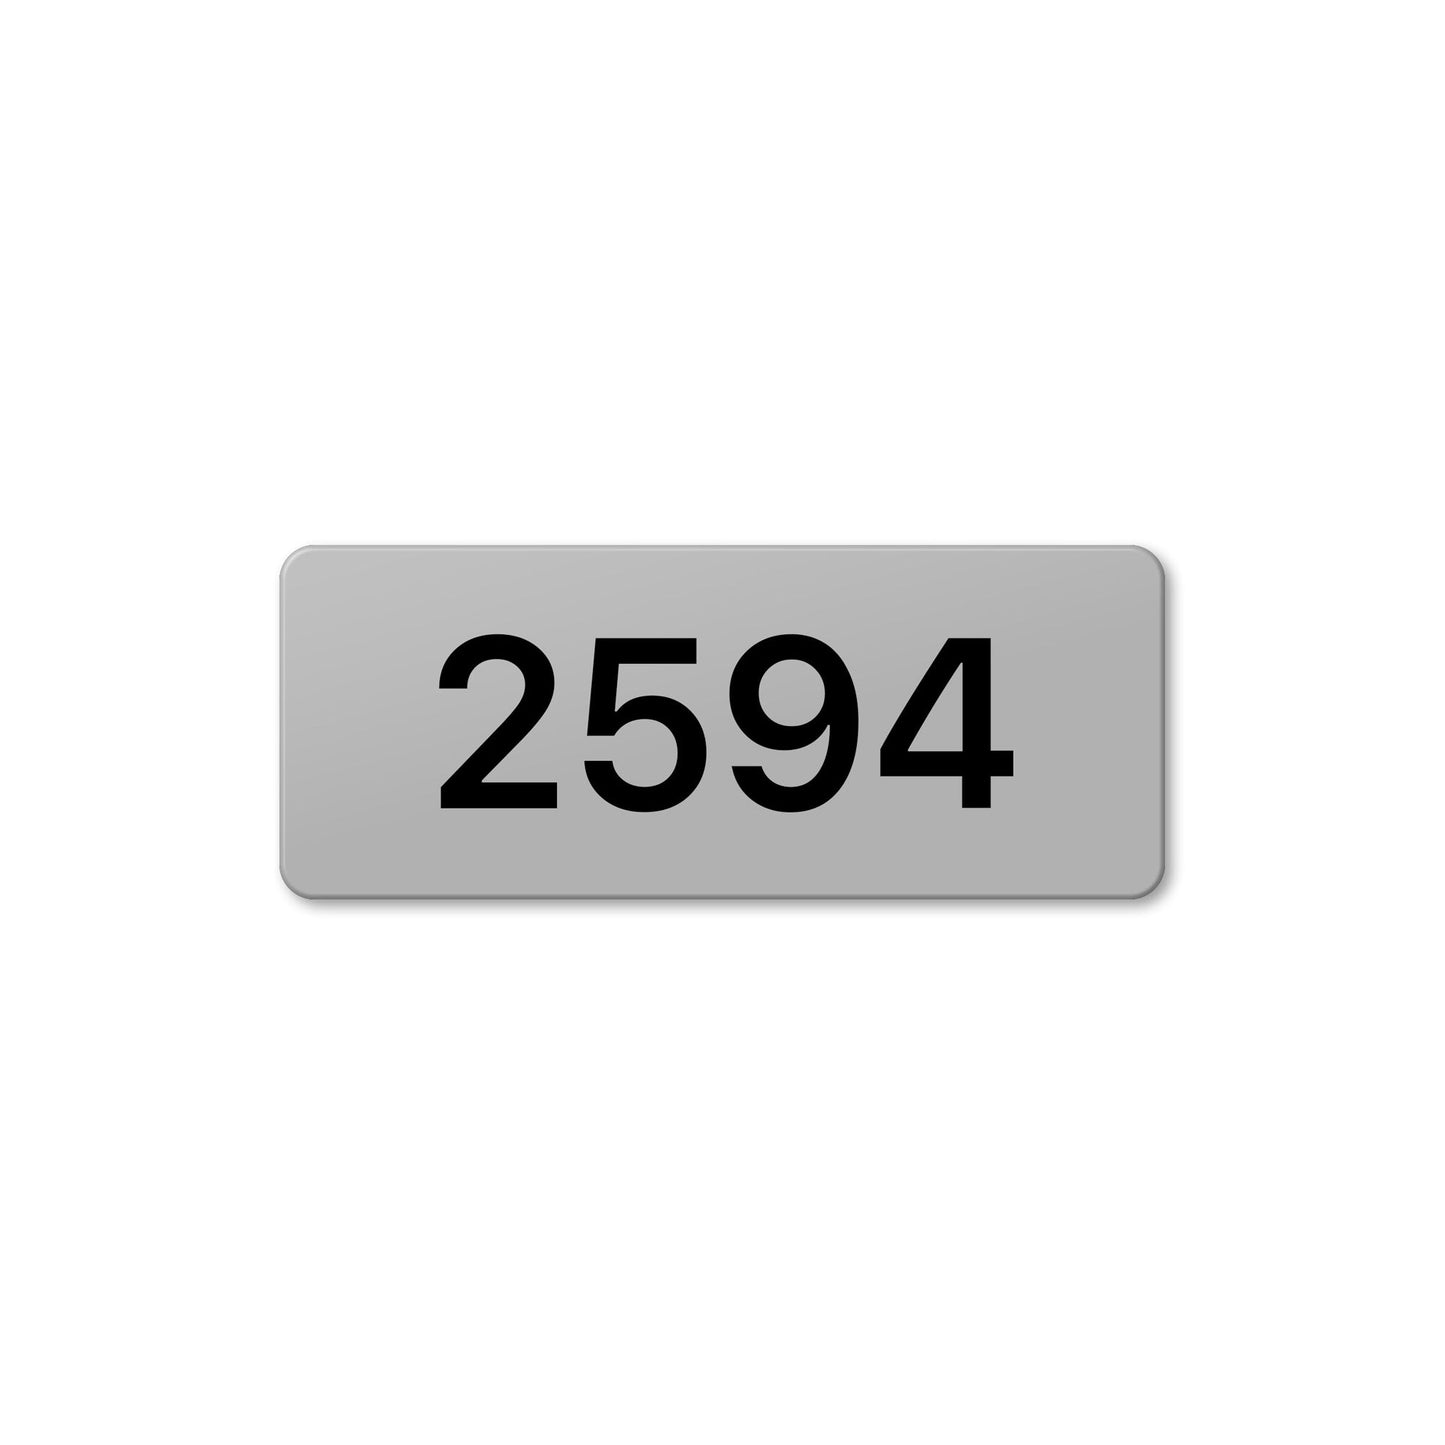 Numeral 2594